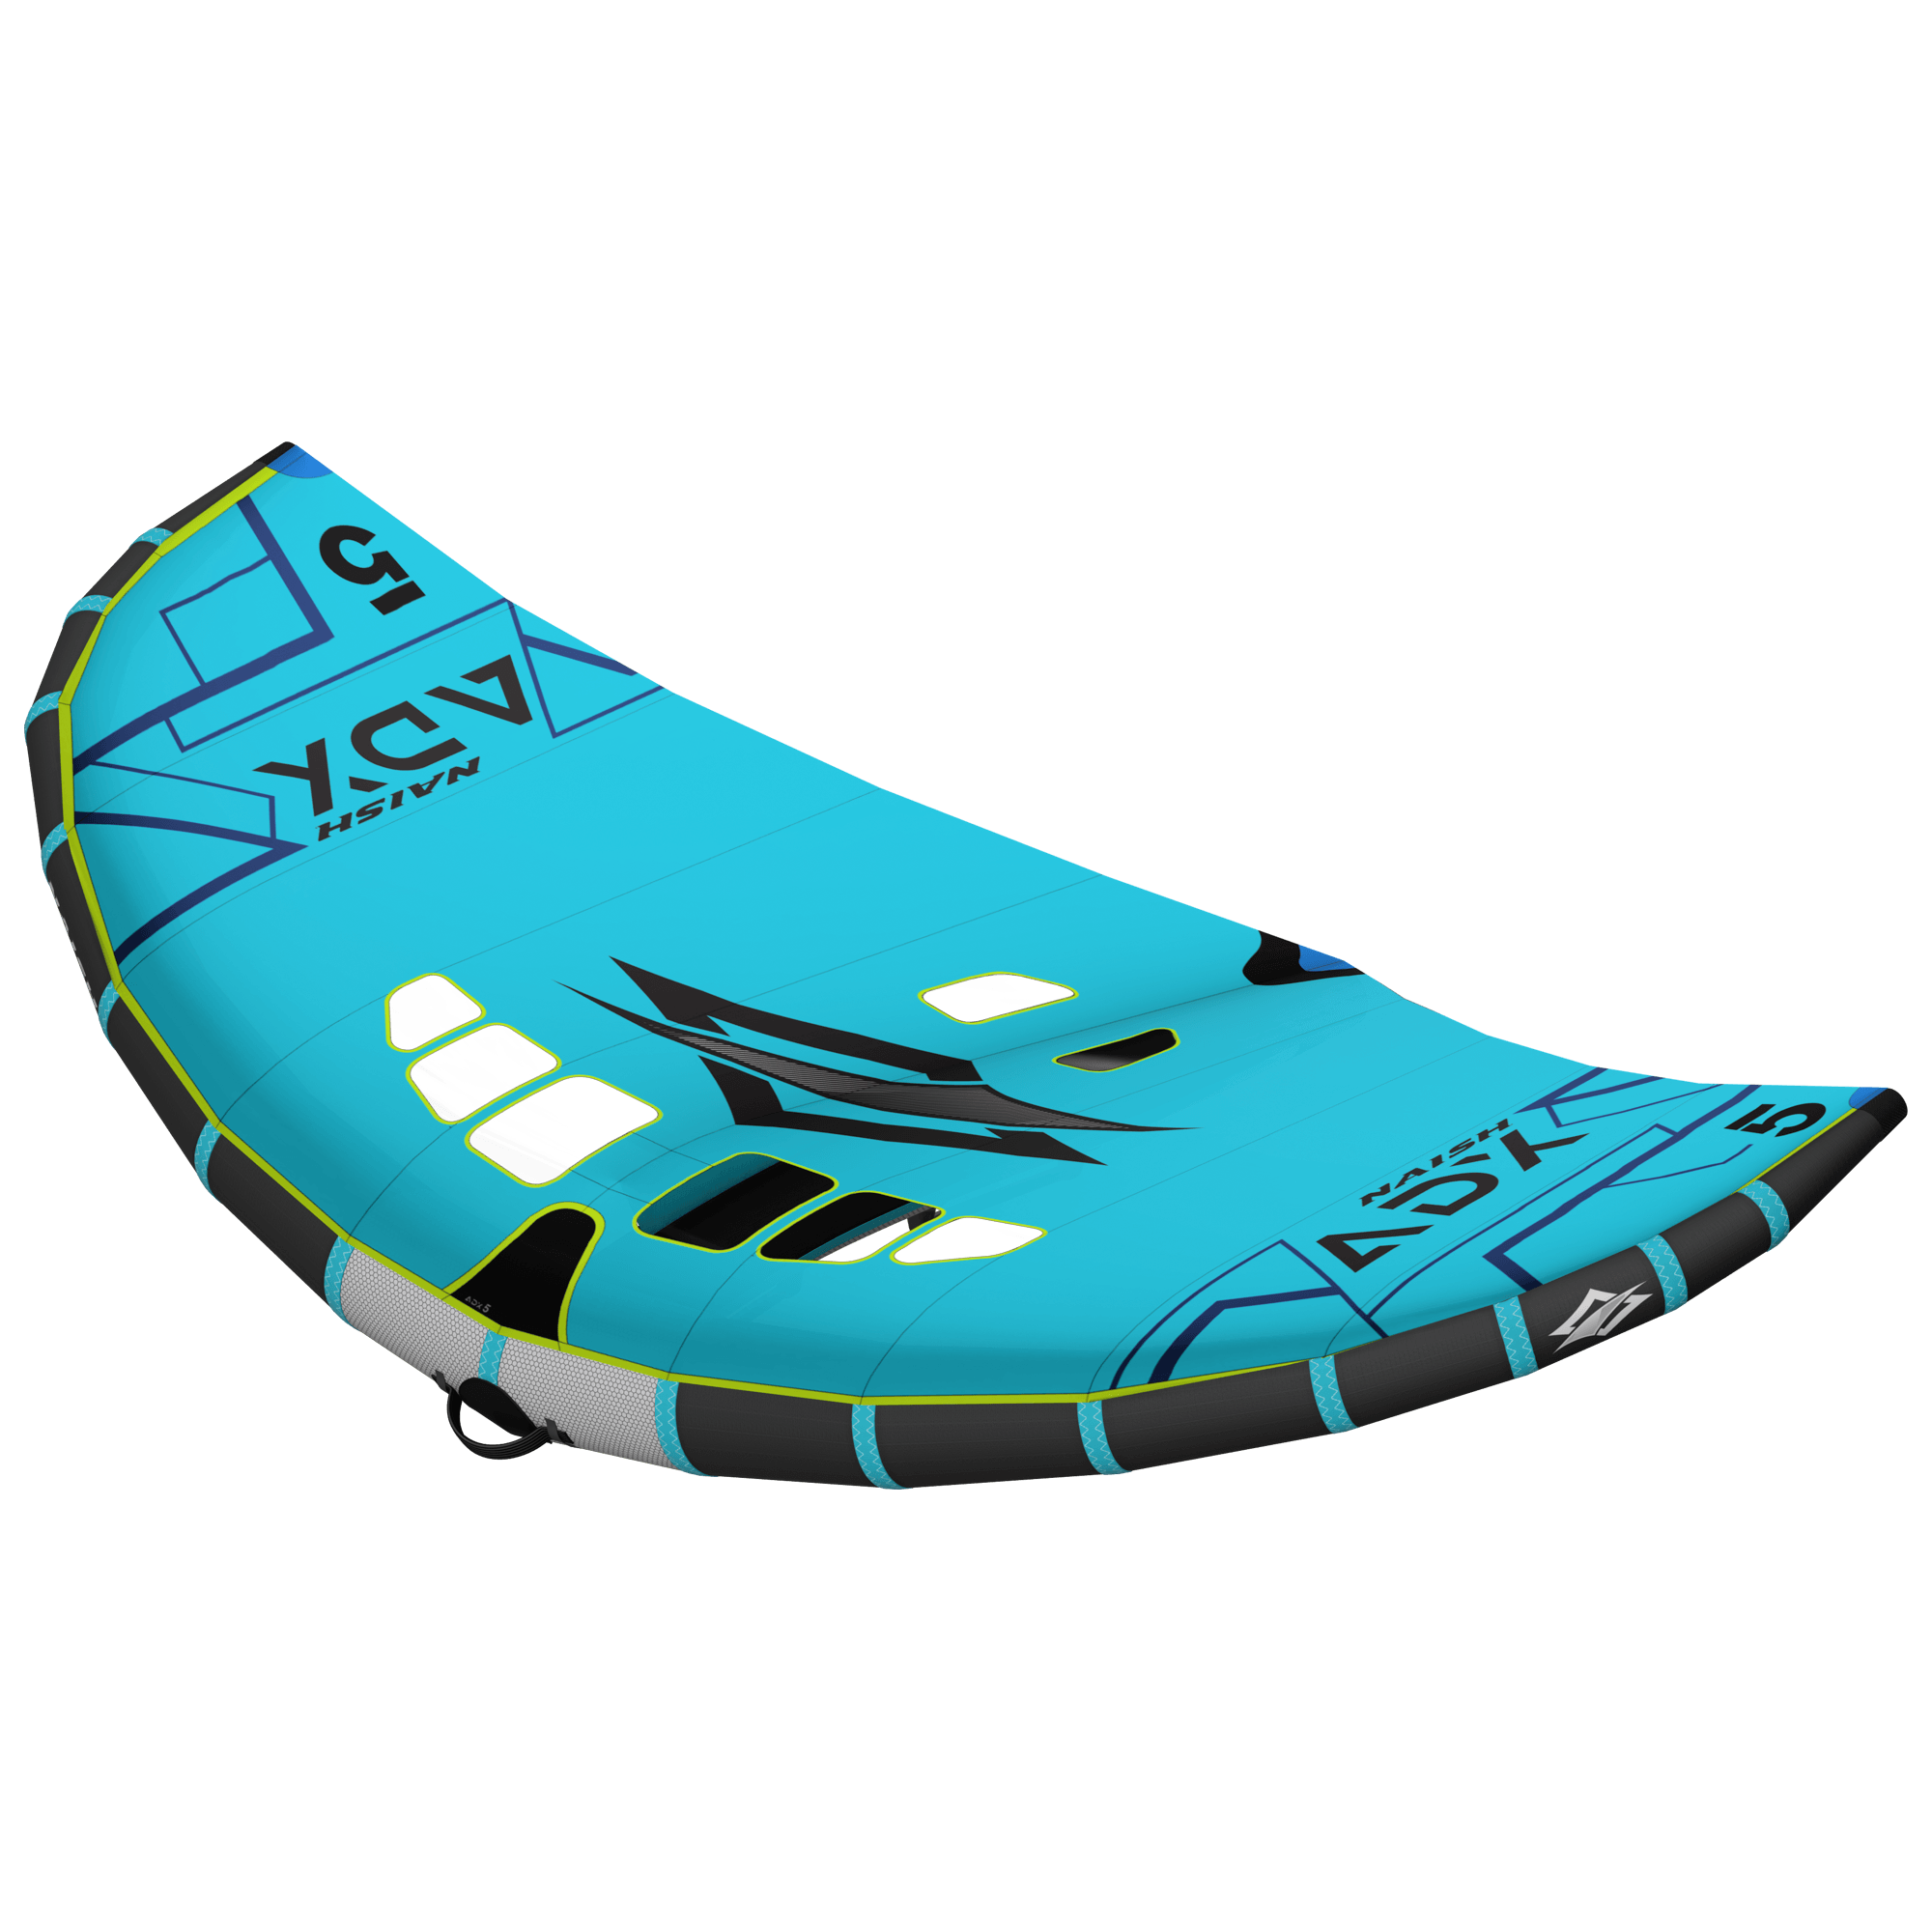 Wing-Surfer ADX